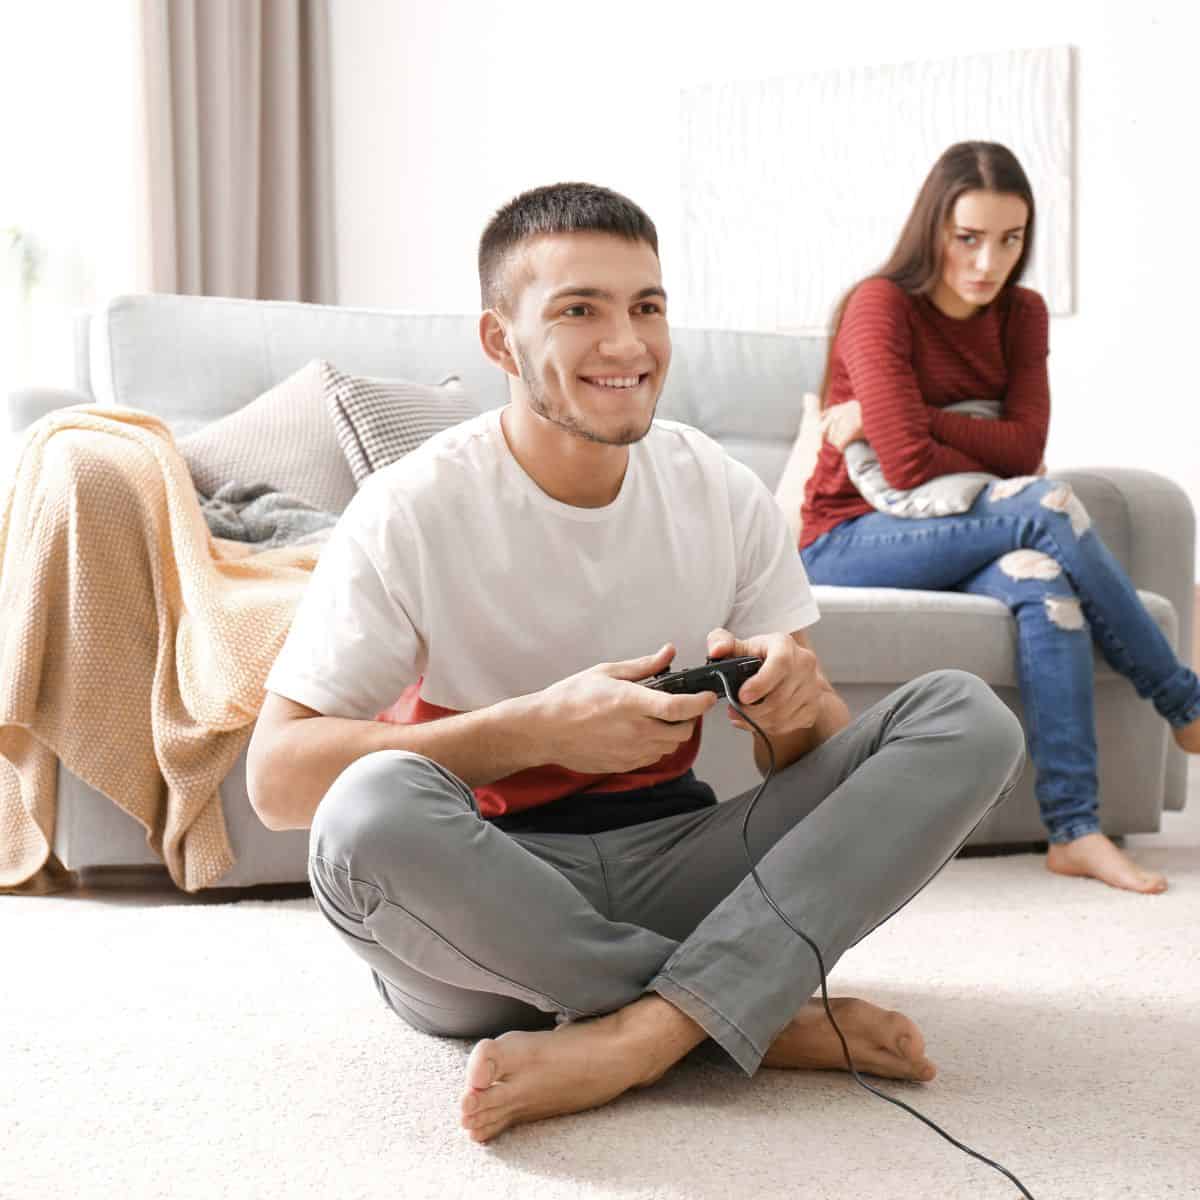 angry woman looking at man playing a game